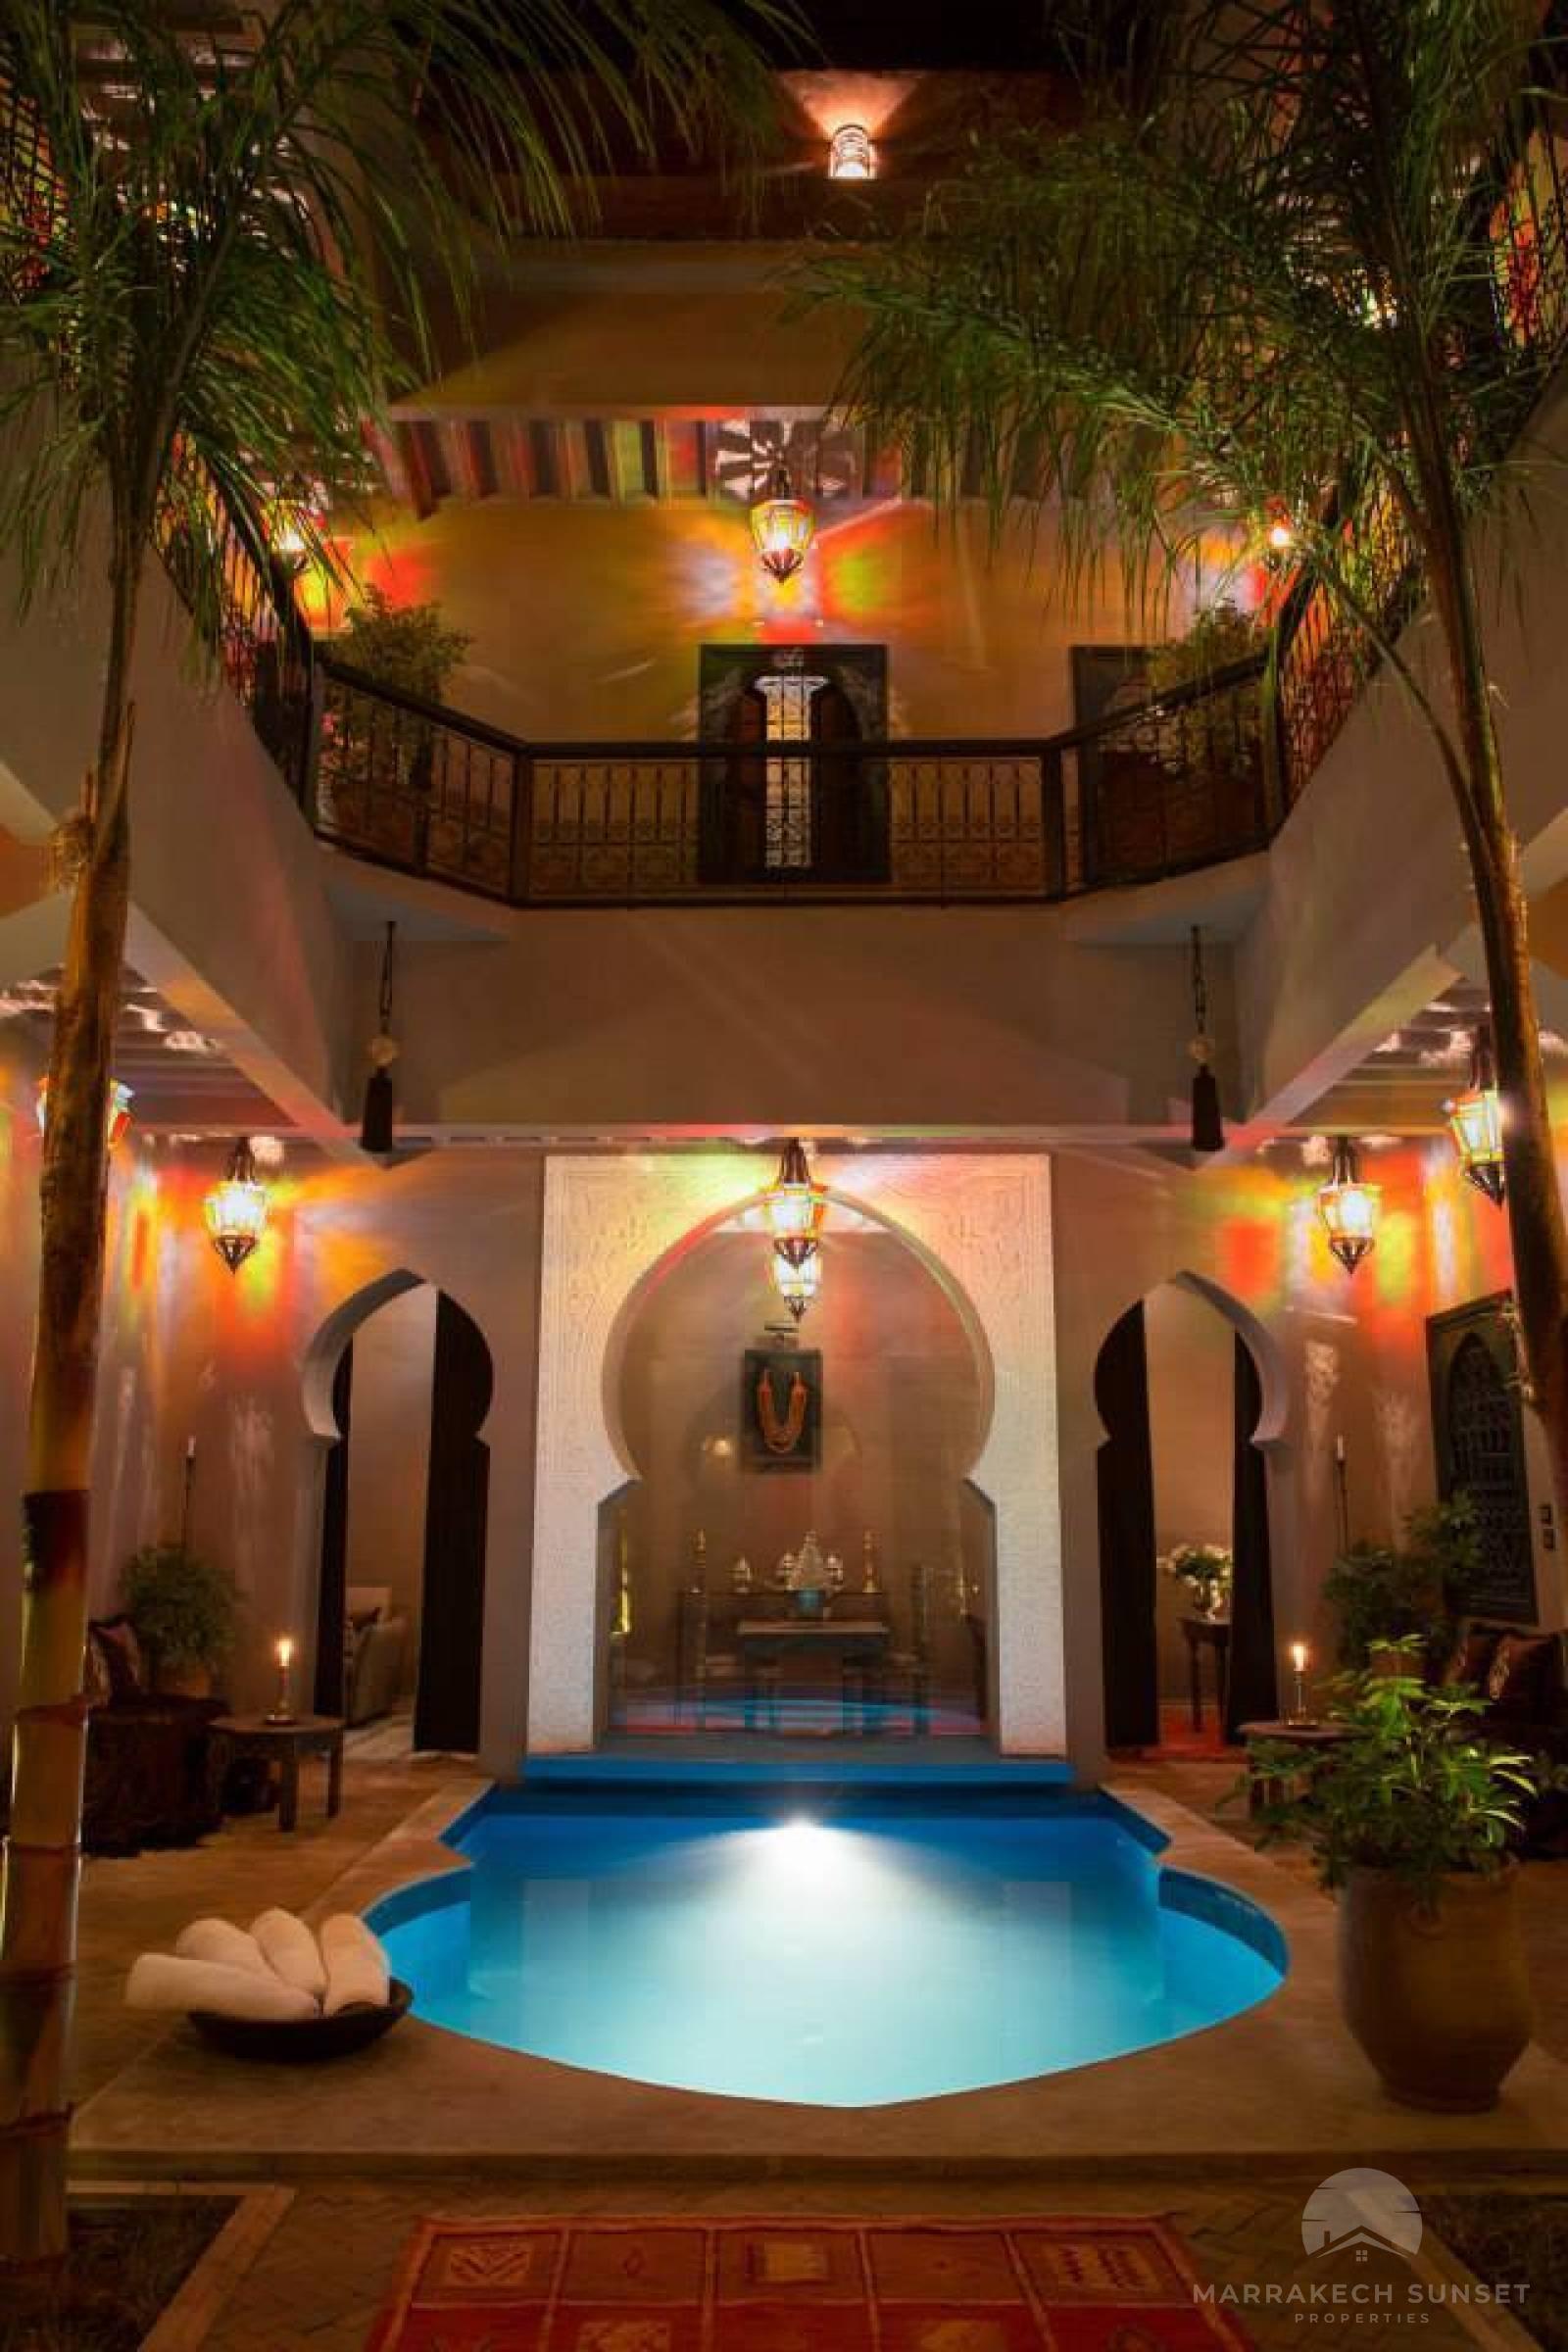 Authentic 9 bedroom Riad with prime location for sale in Marrakech